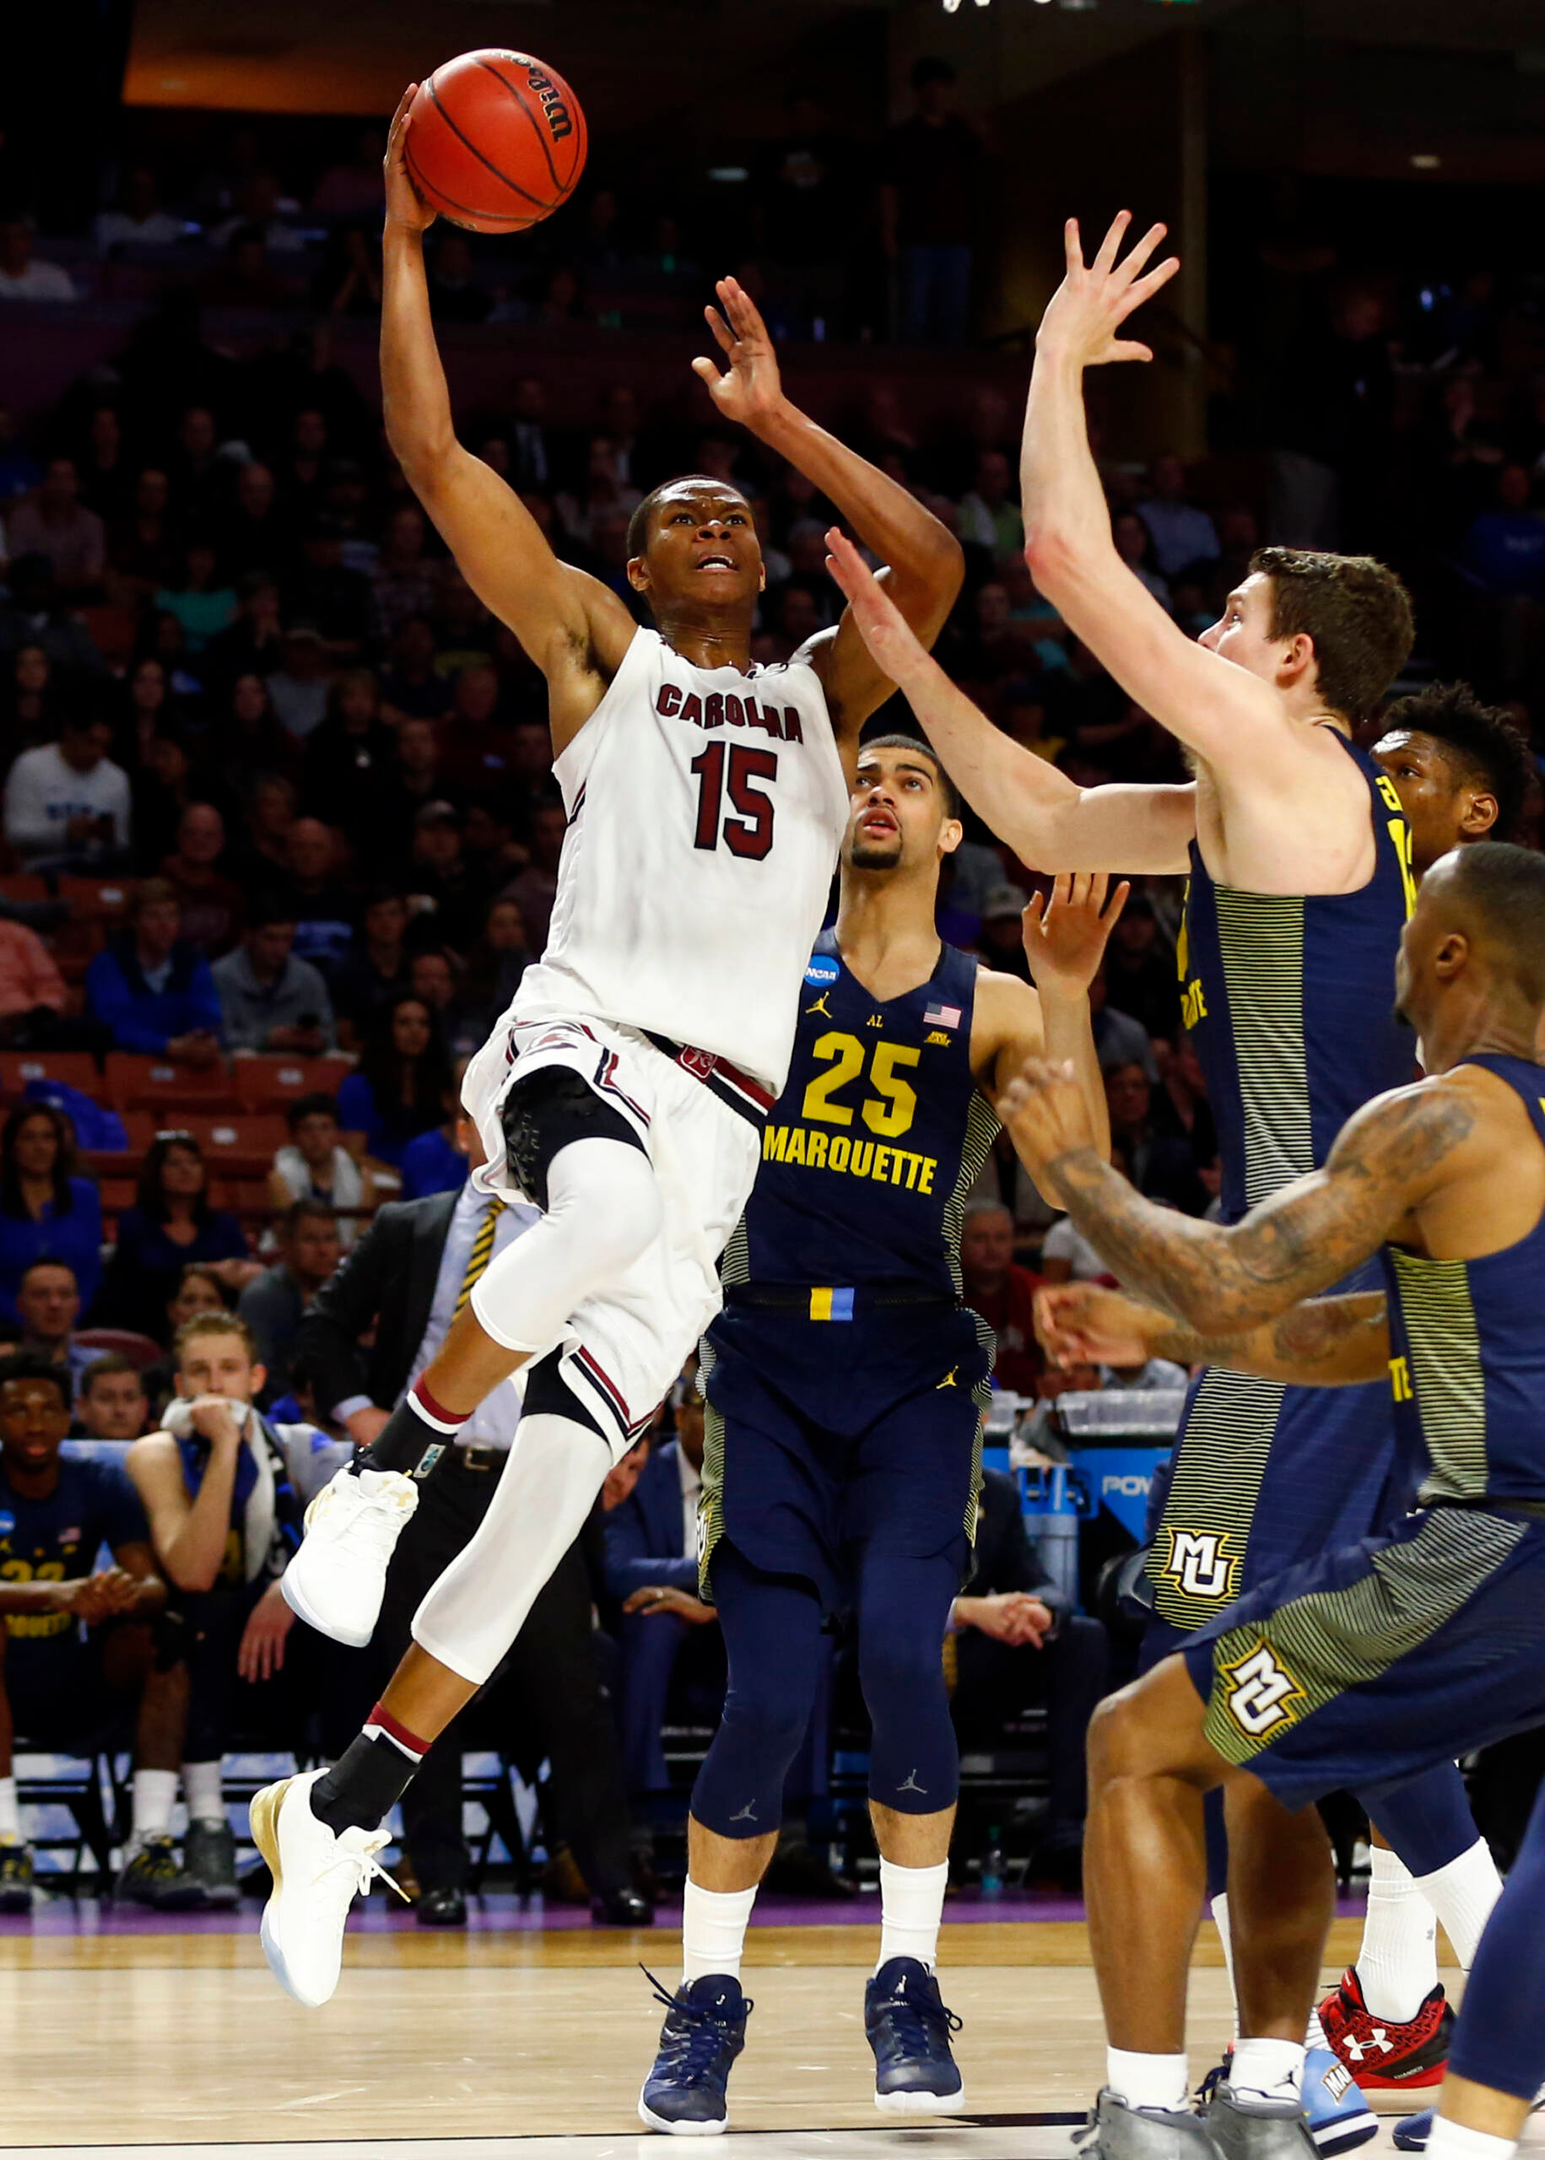 Dozier Declares For 2017 NBA Draft, Eligible To Return